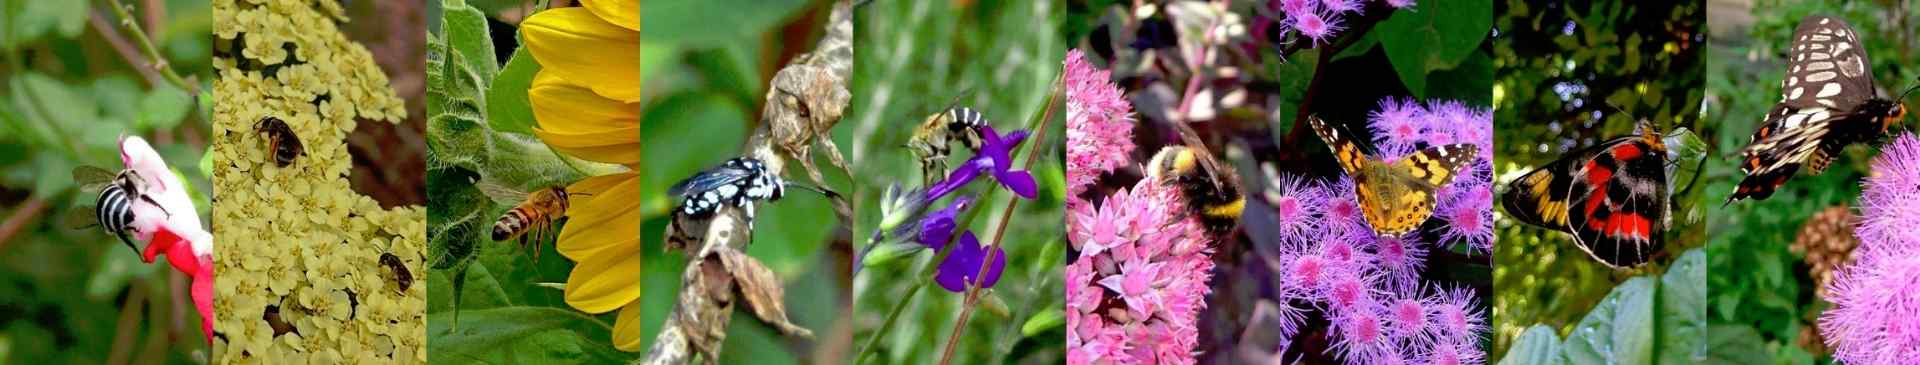 Let's Talk About Flowers, Pollinators and Beneficial Insects!